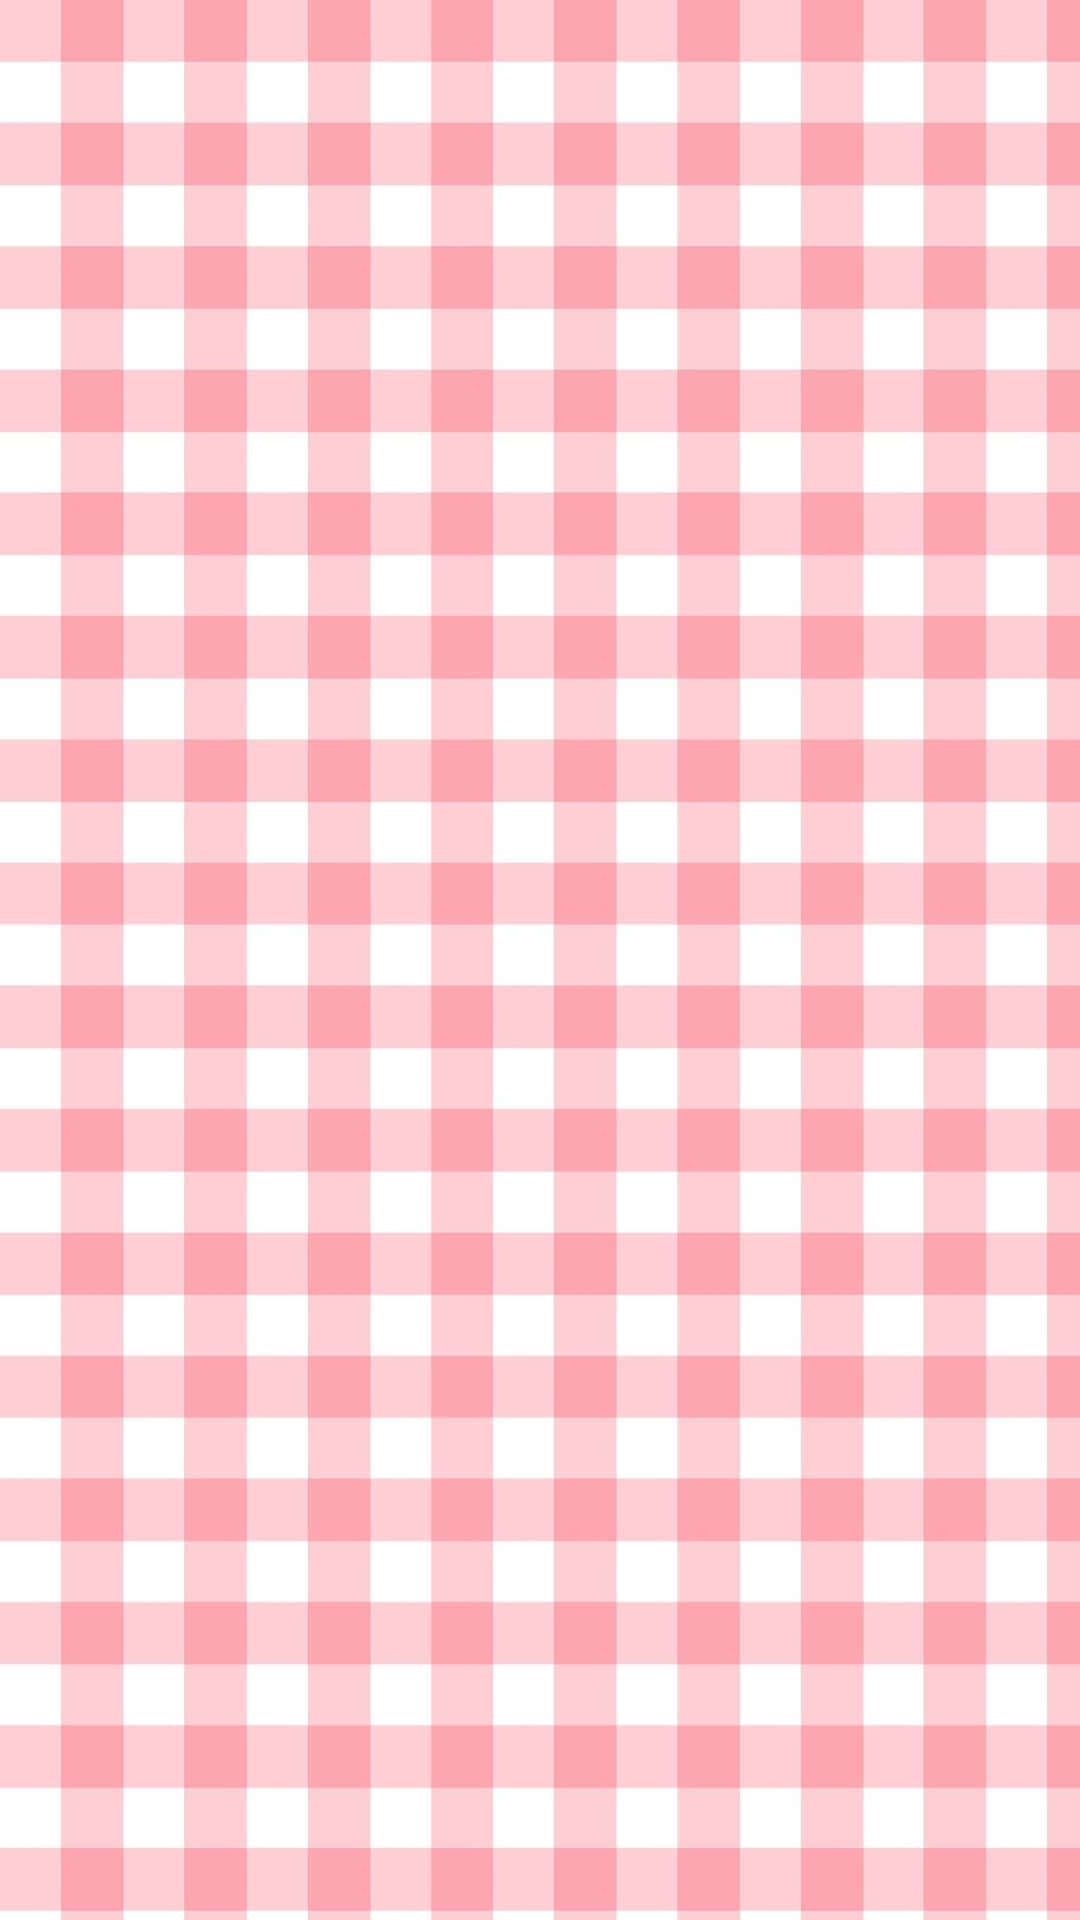 Premium Vector  Square wide grid pattern art pink color in dotted line  wide grid design for print seamless pattern